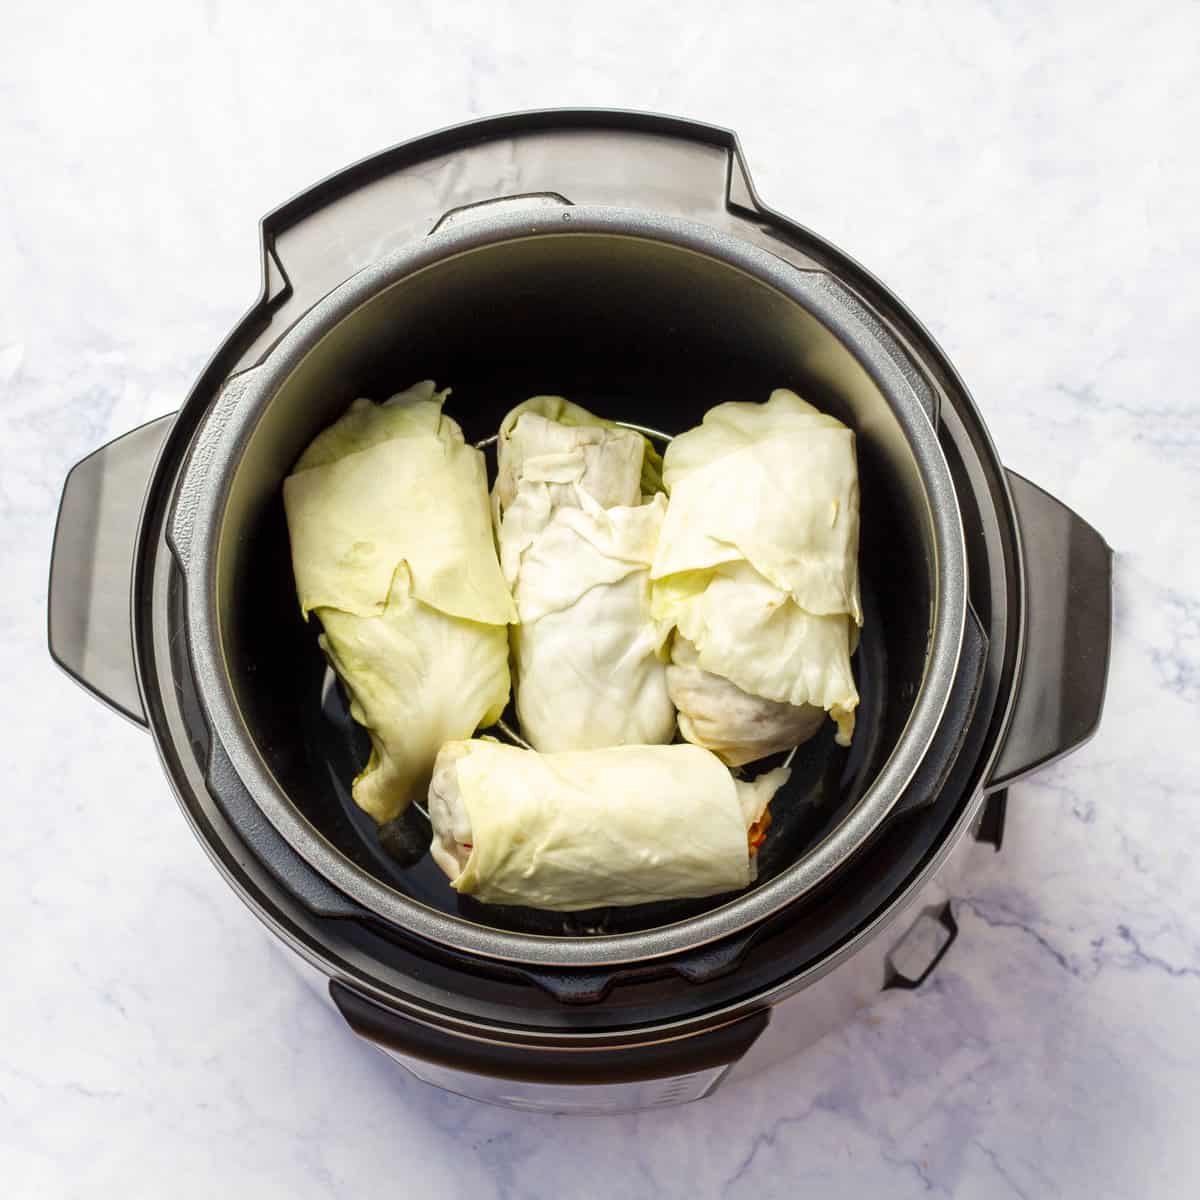 Cook the cabbage rolls